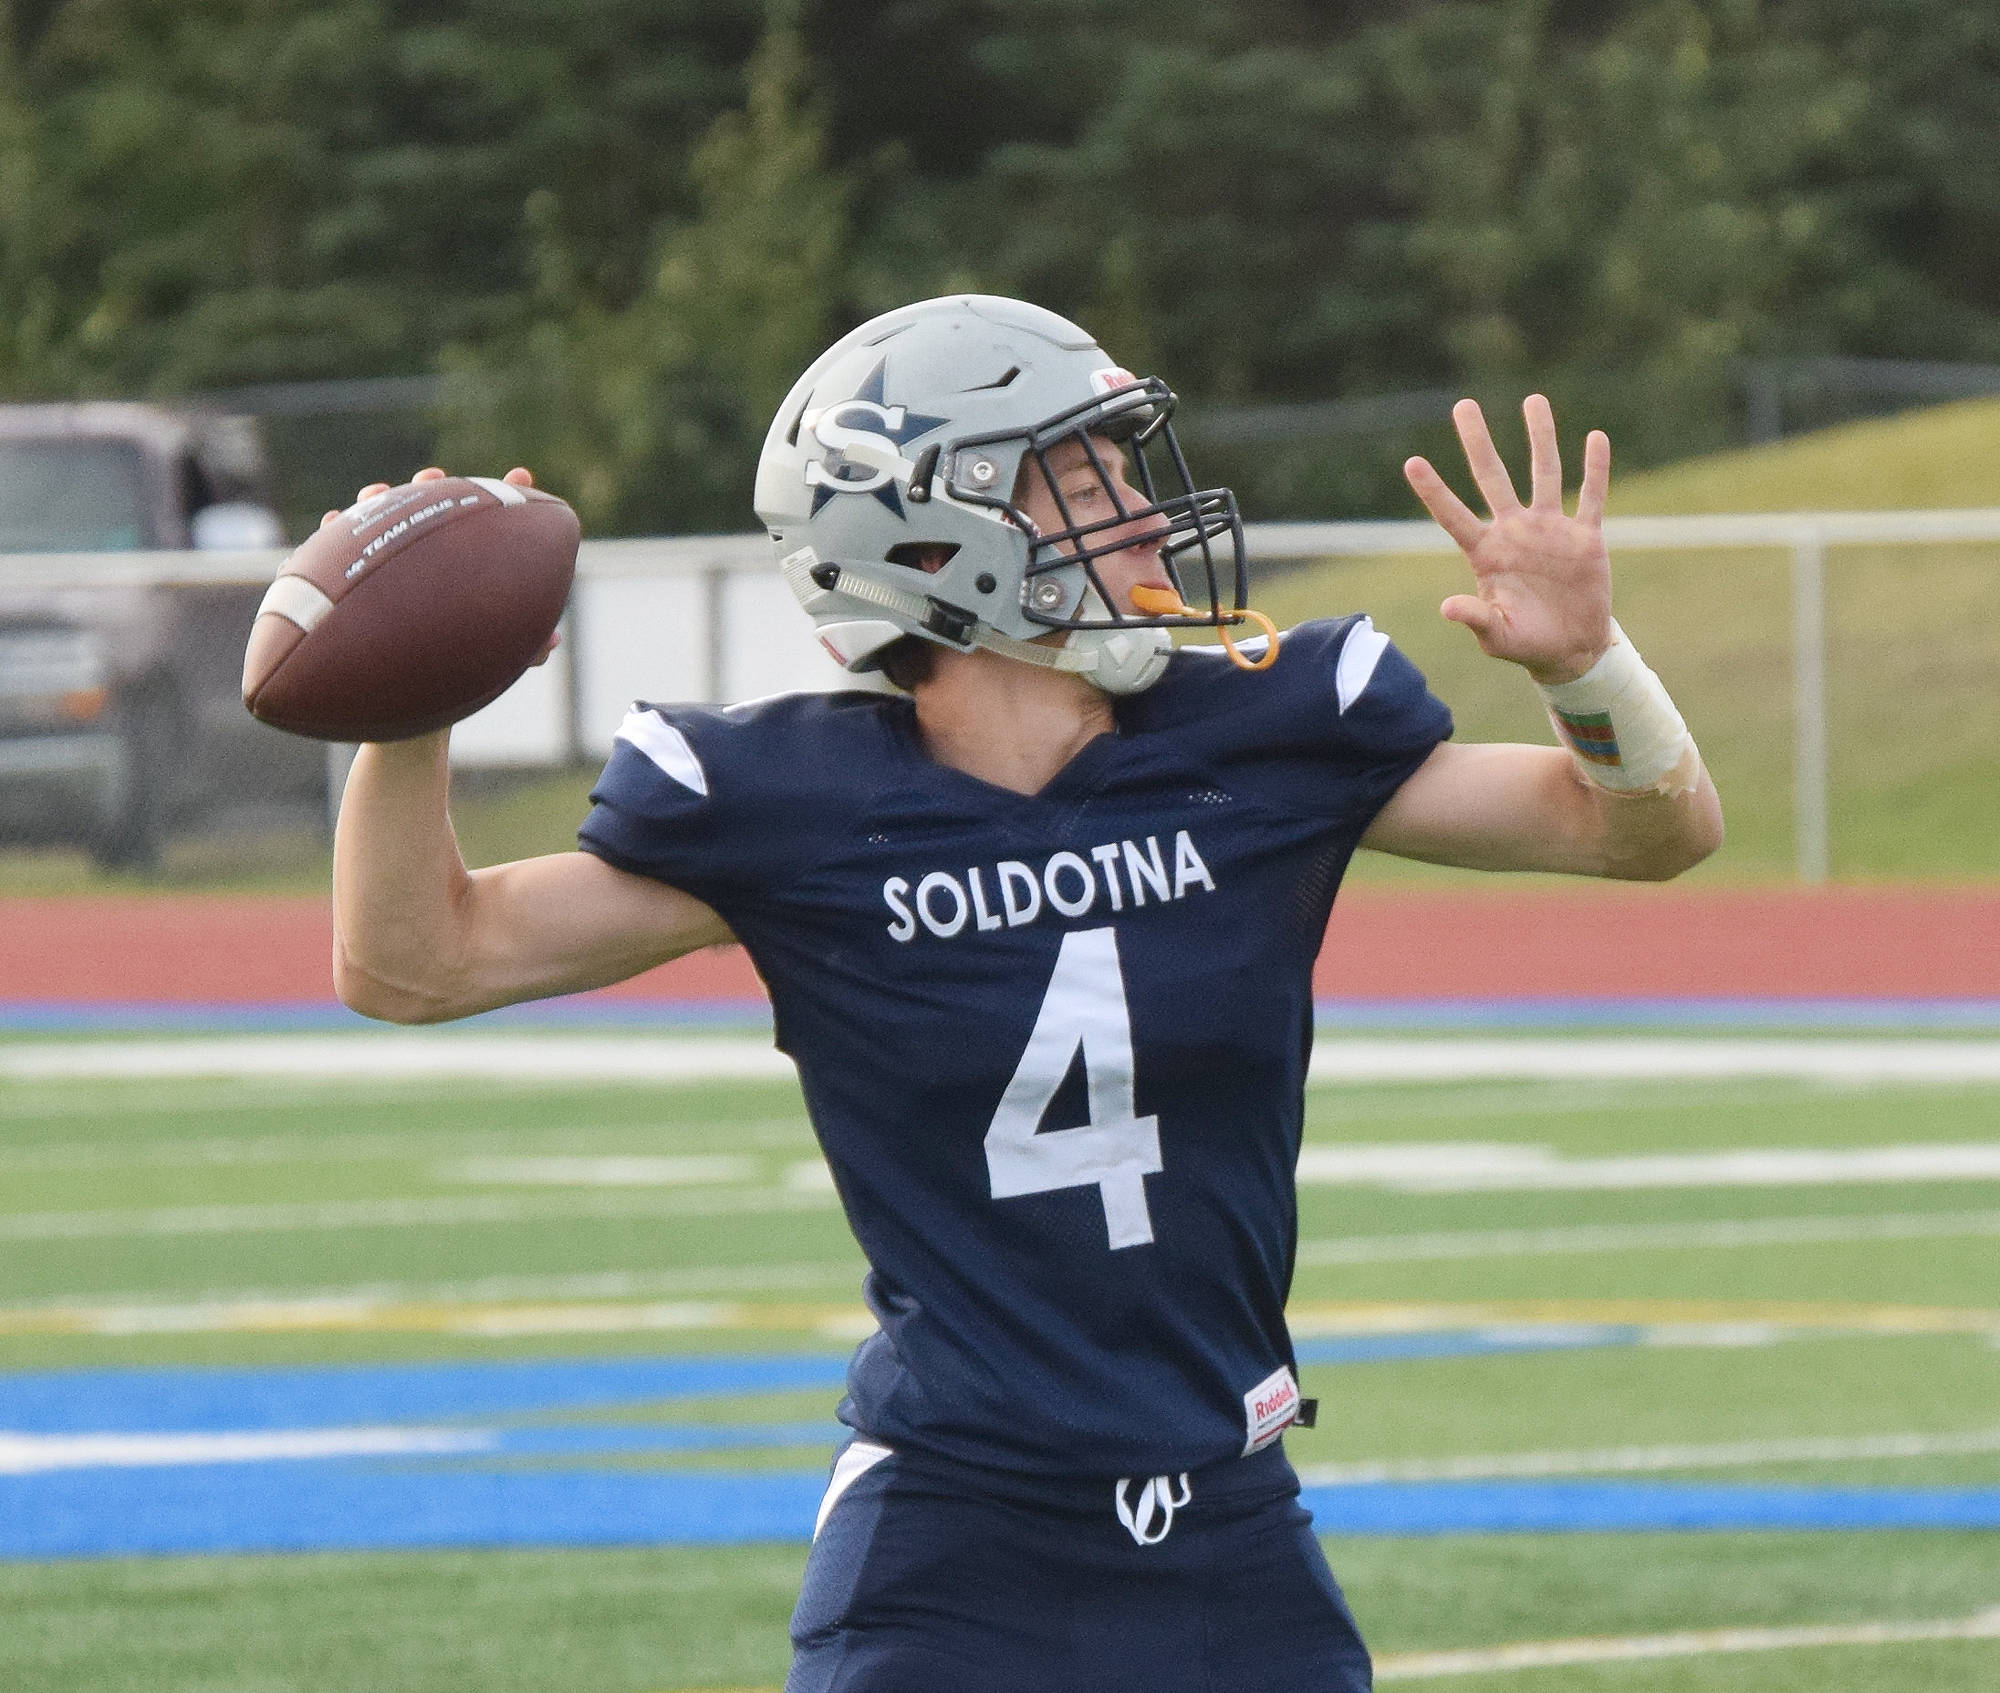 Soldotna junior Jersey Truesdell winds up for a pass Friday against North Pole at Soldotna’s Justin Maile Field. (Photo by Joey Klecka/Peninsula Clarion)